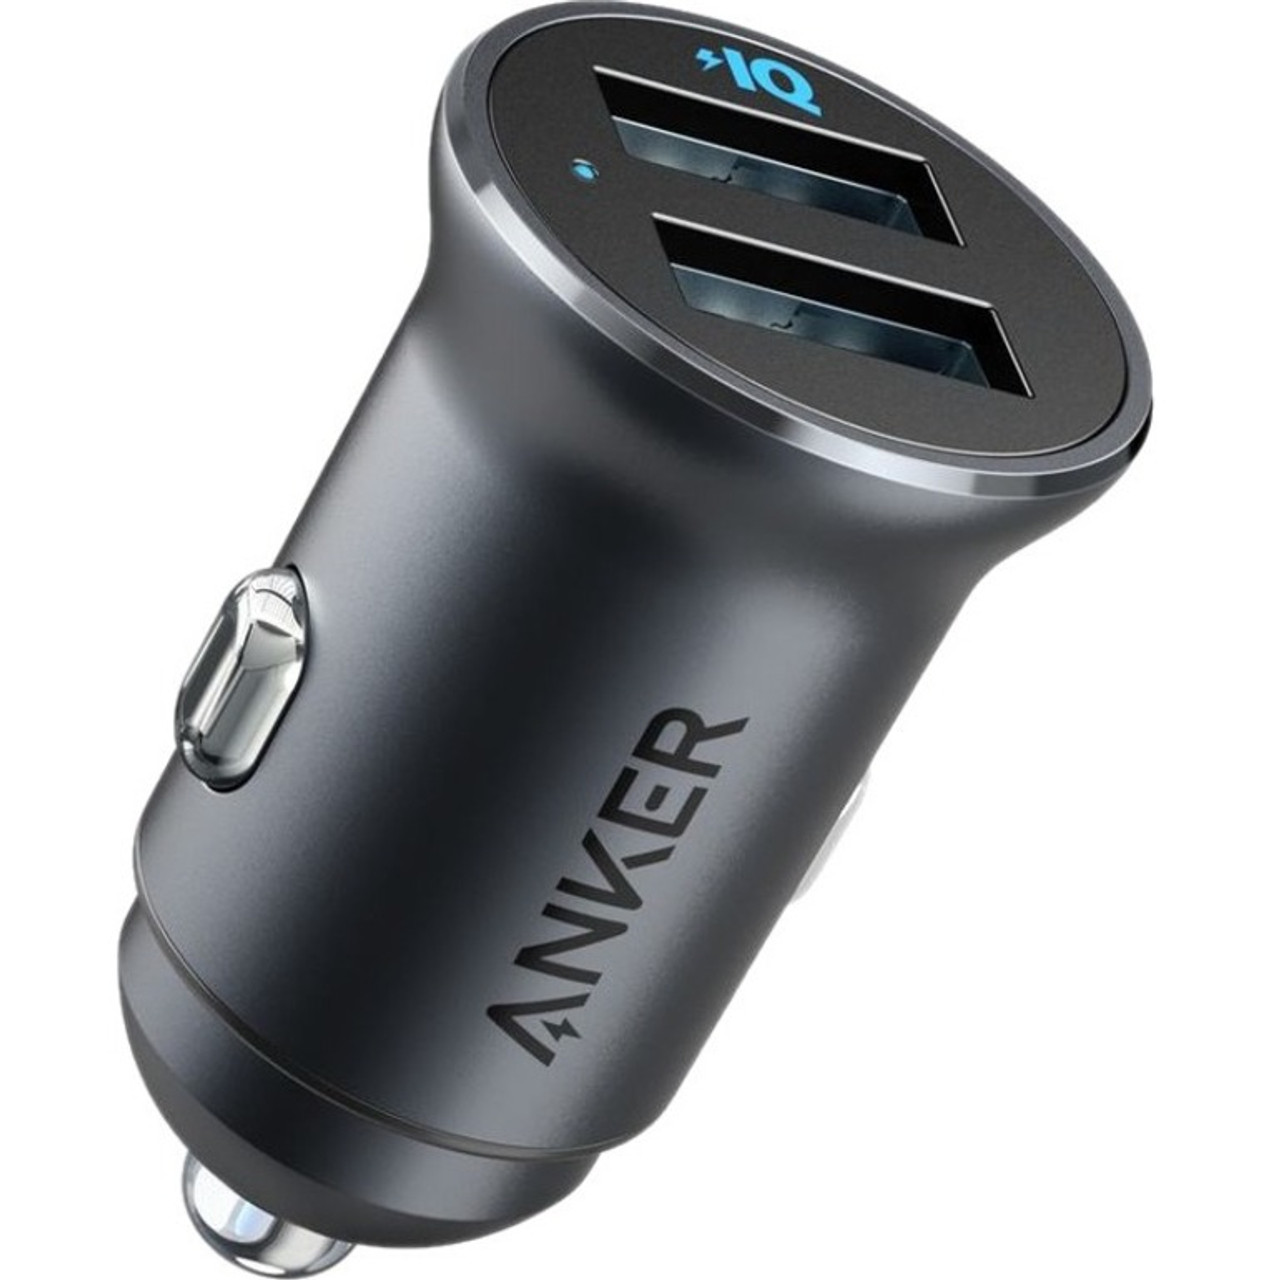 ANKER PowerDrive 2 Alloy Metal Mini Car Charger - A2727011